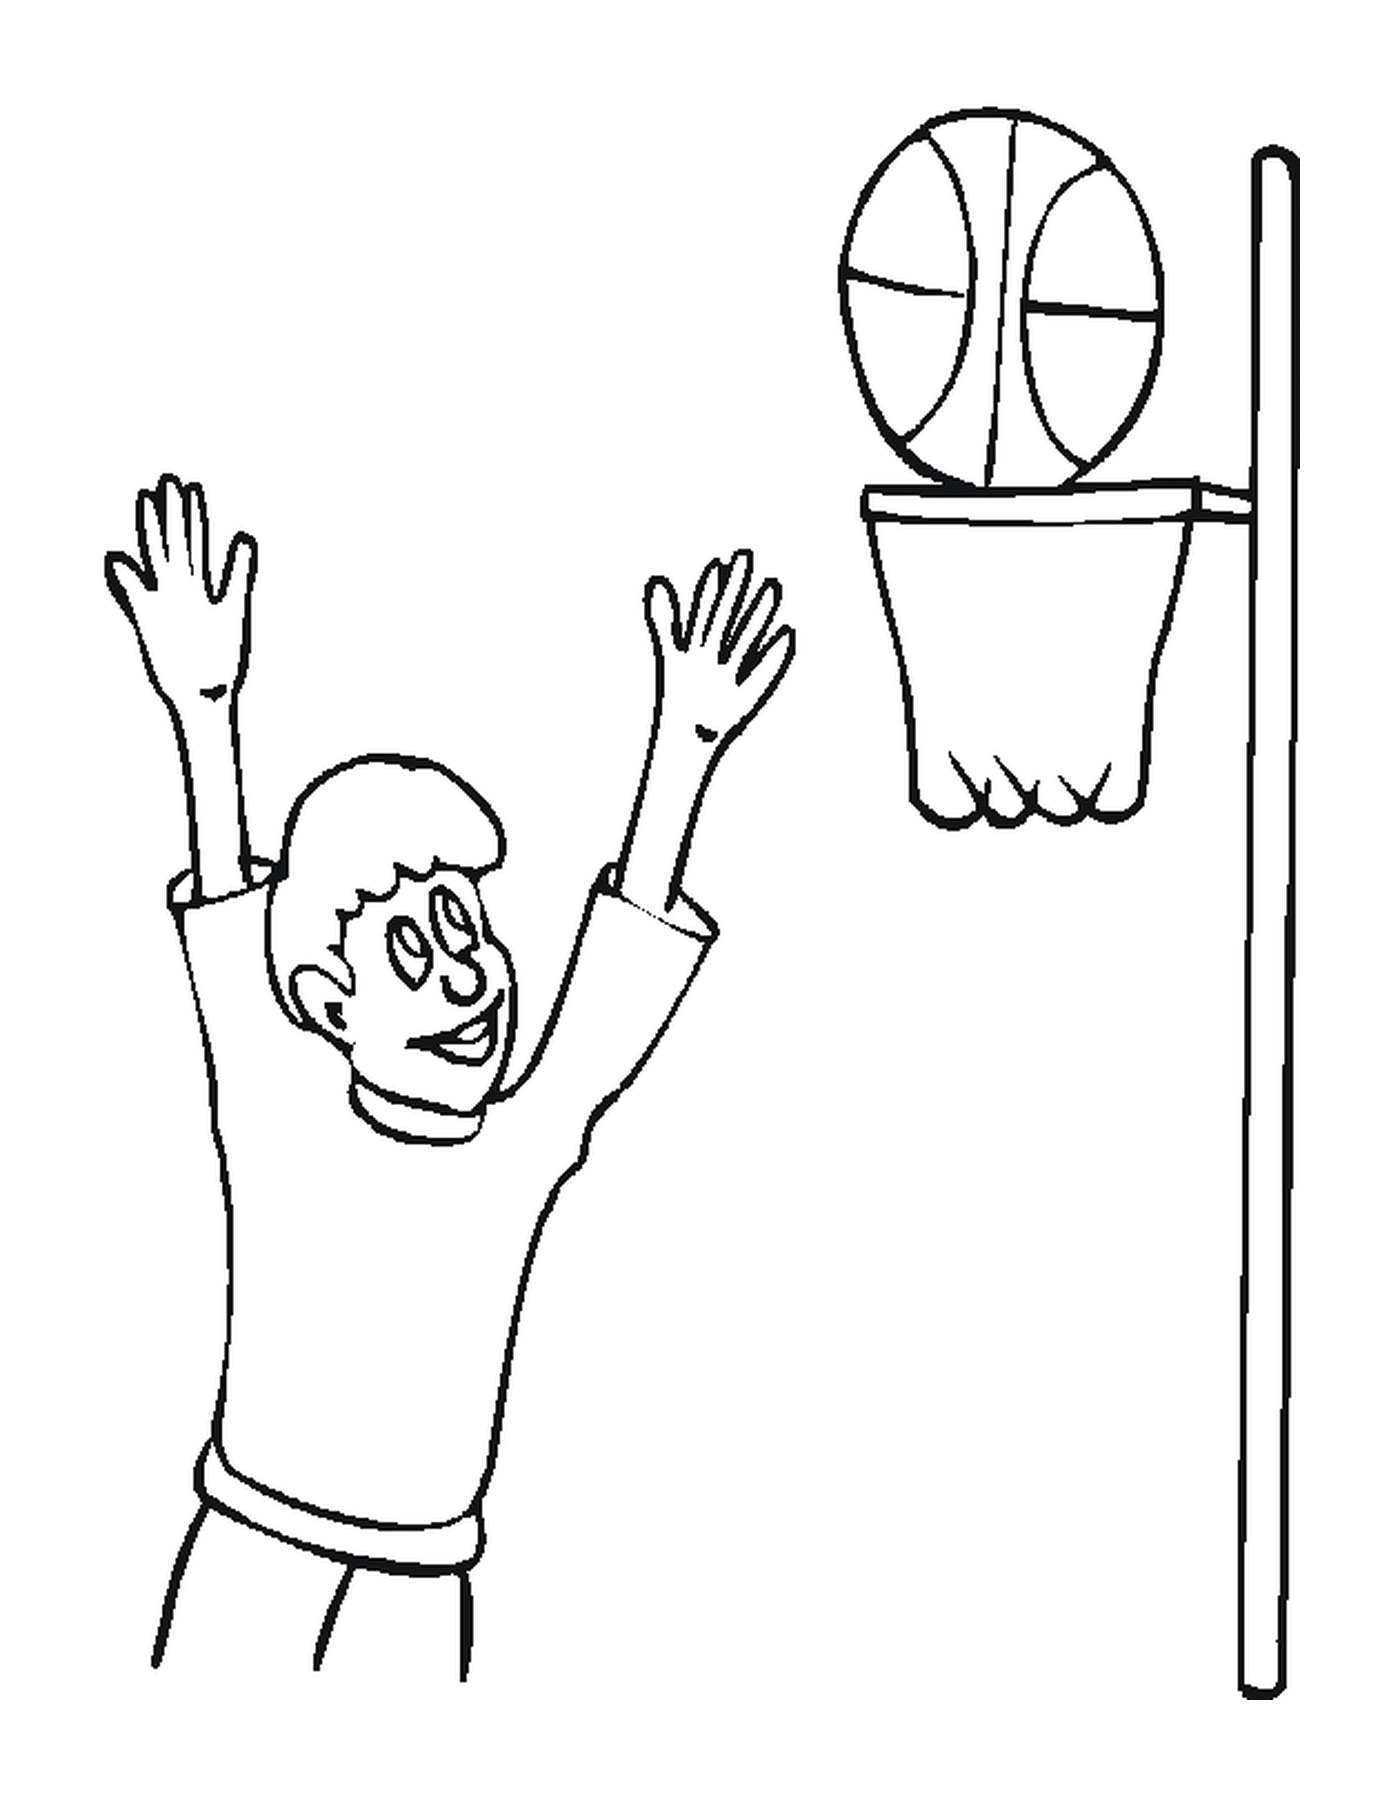  A basketball player plays in a room 